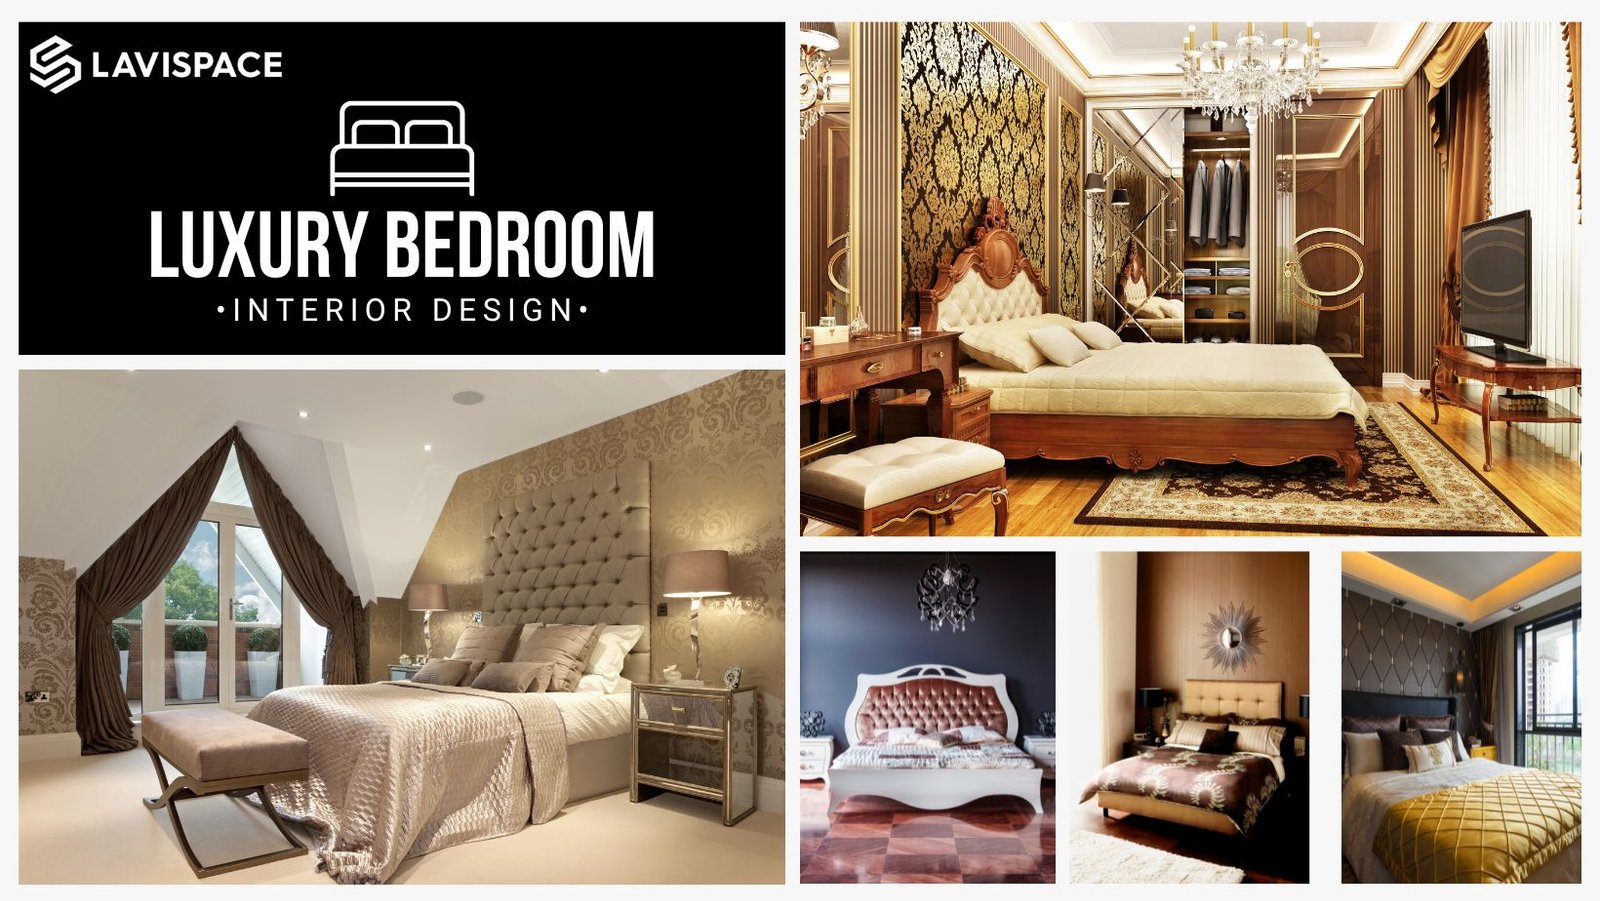 You are currently viewing Luxury Bedroom Interior Design | Lavispace